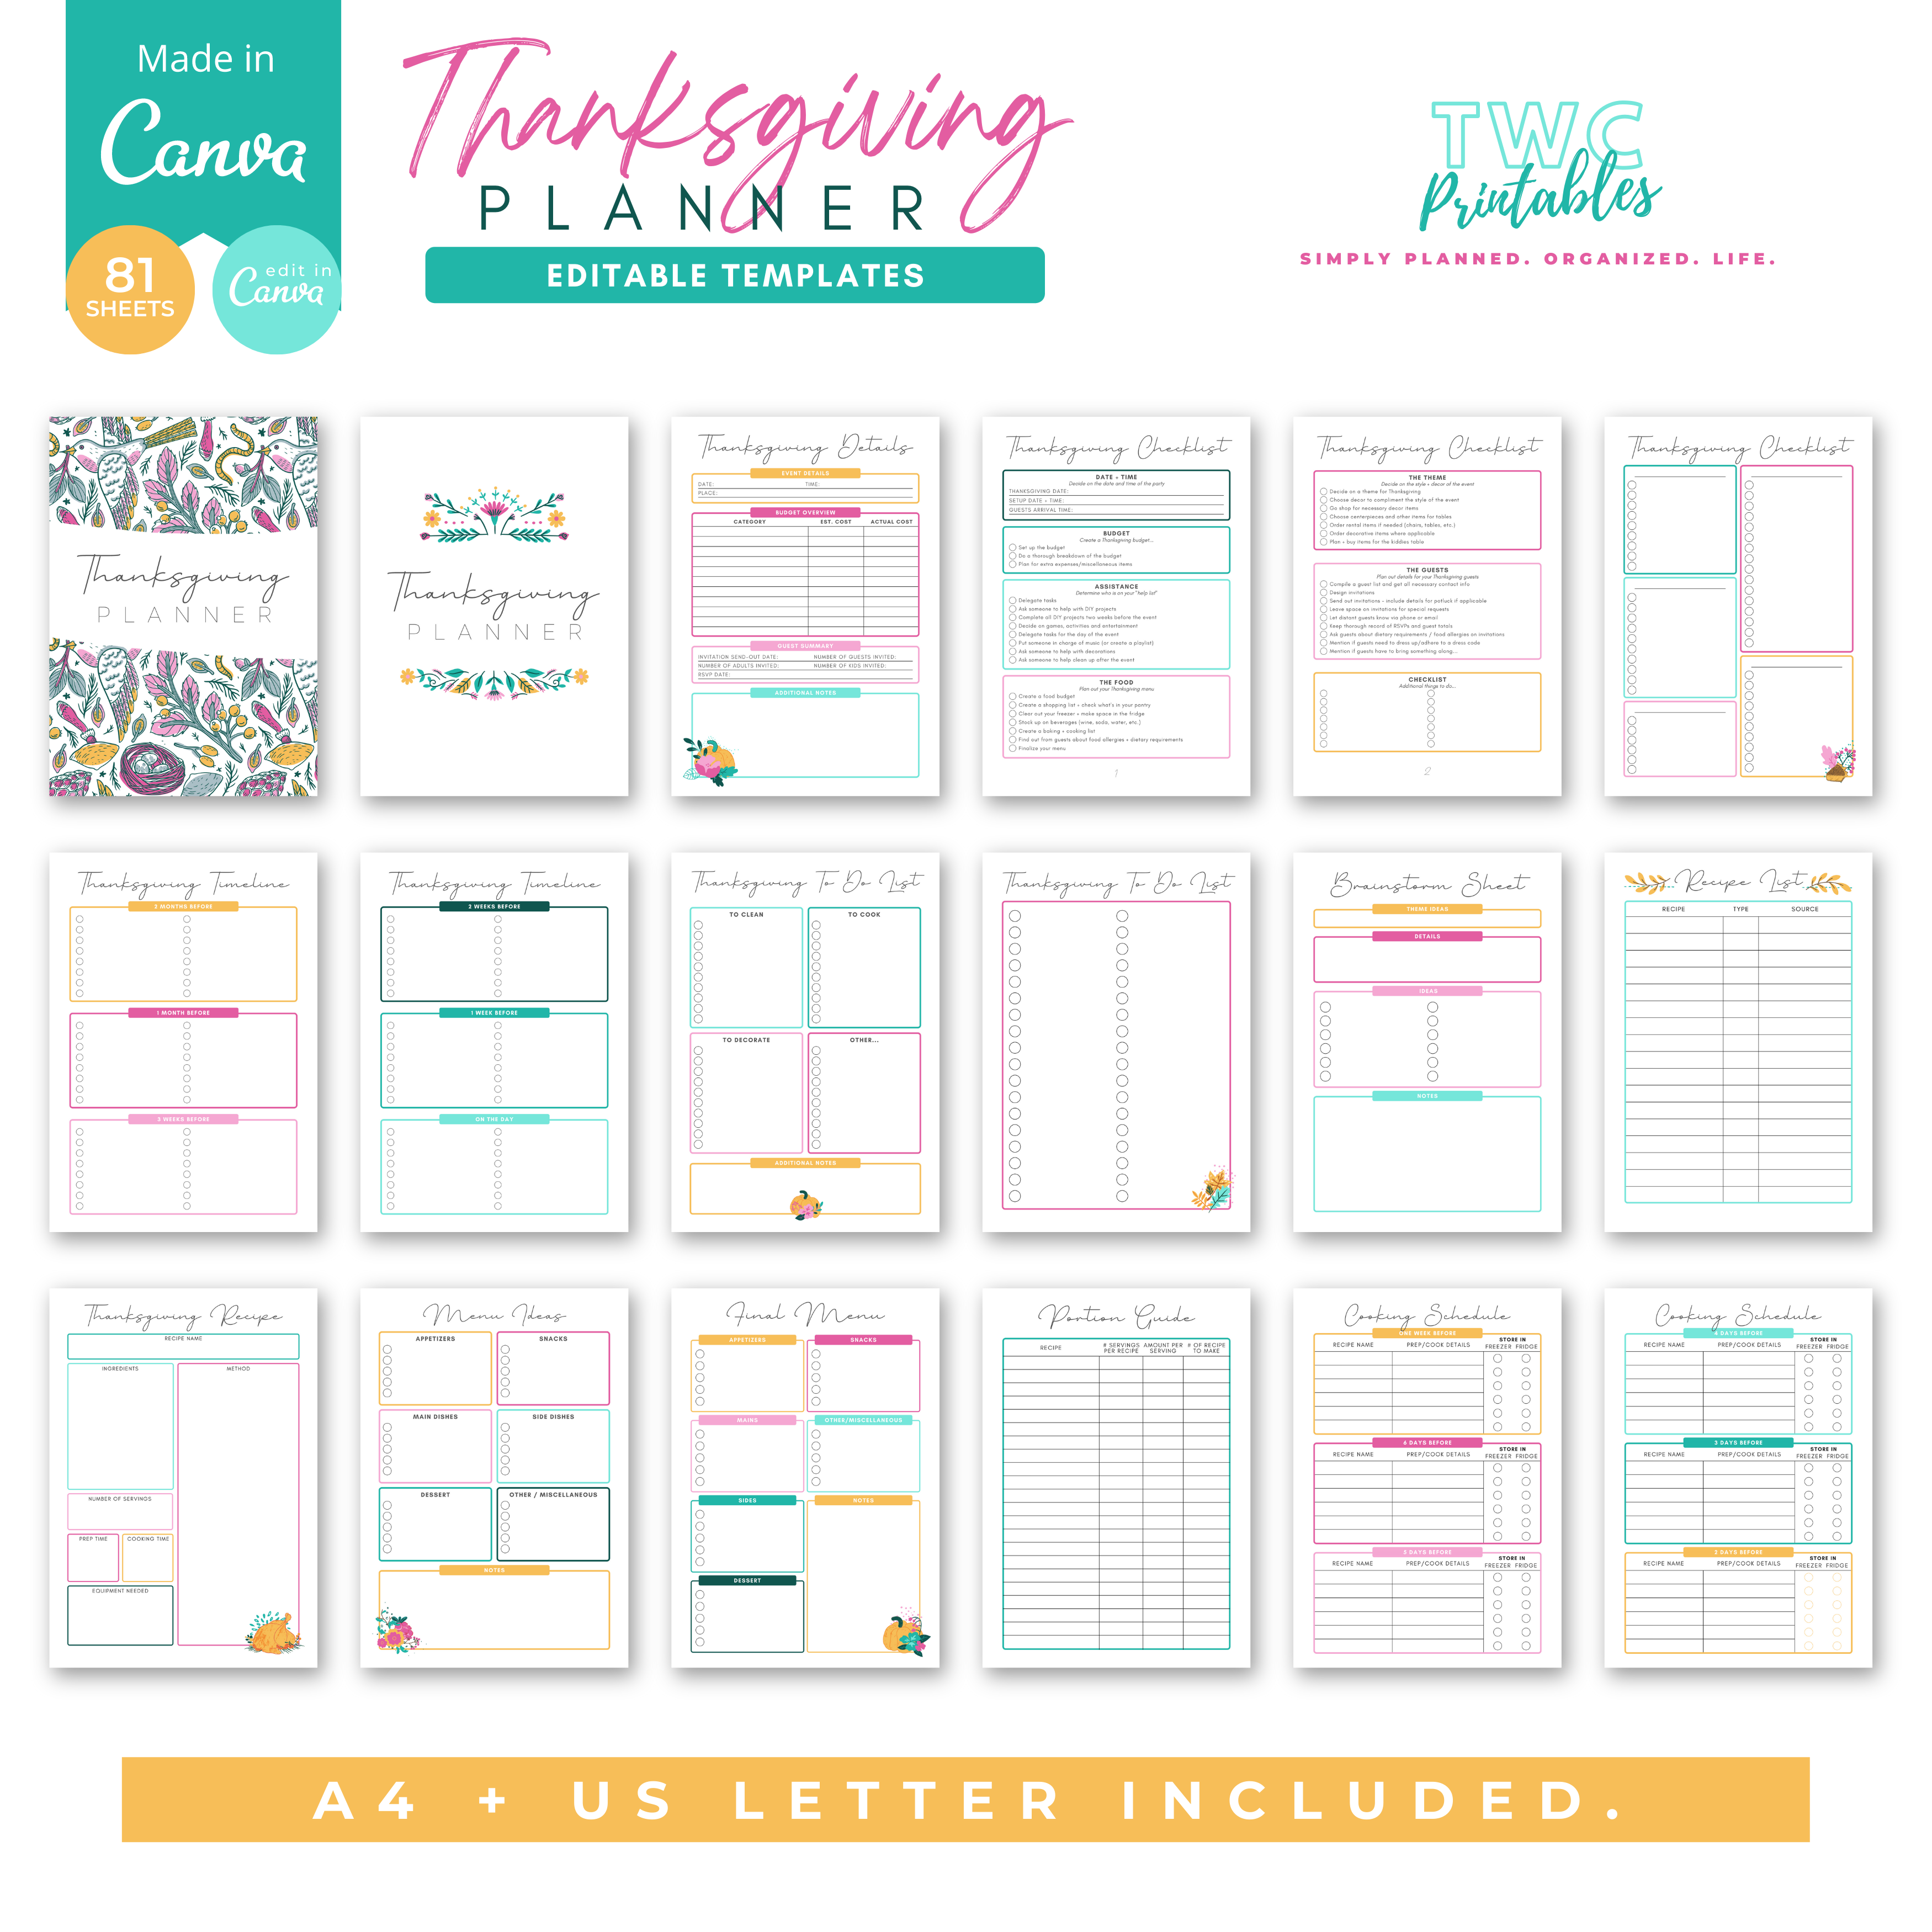 The ultimate Thanksgiving planner will help you to plan all aspects of this beautiful event! Plan out your entire menu, meal prep, and recipes. Get your house ready for guests and make all the necessary Thanksgiving preparations. Simply edit this template with the free version of Canva - you can change the entire design, including fonts, colors, elements, and much more! A free Canva guide for beginners is included in your purchase of this listing.